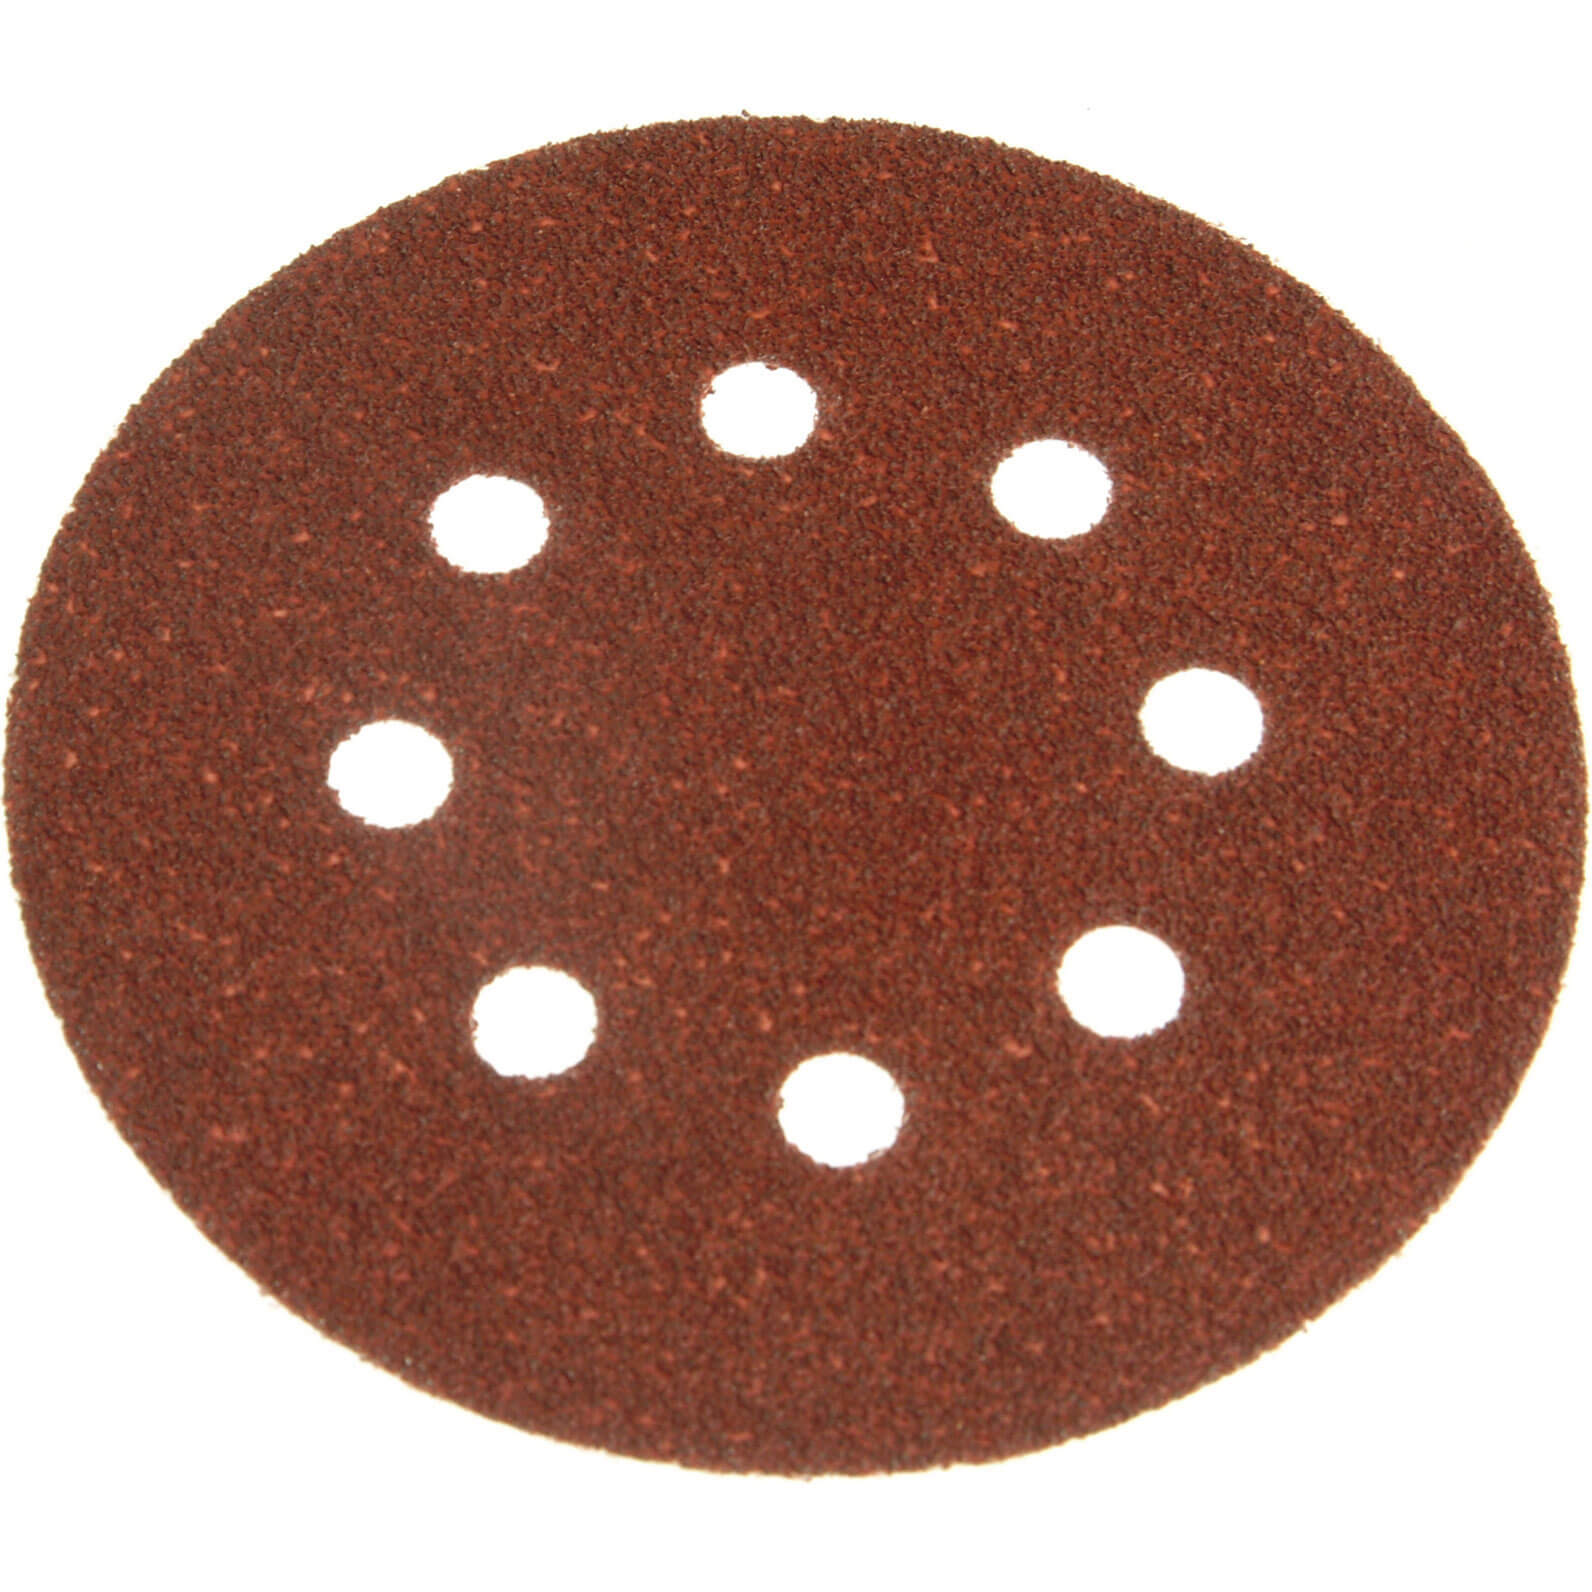 Image of Black and Decker Piranha Quick Fit ROS Sanding Discs 125mm 125mm 120g Pack of 5